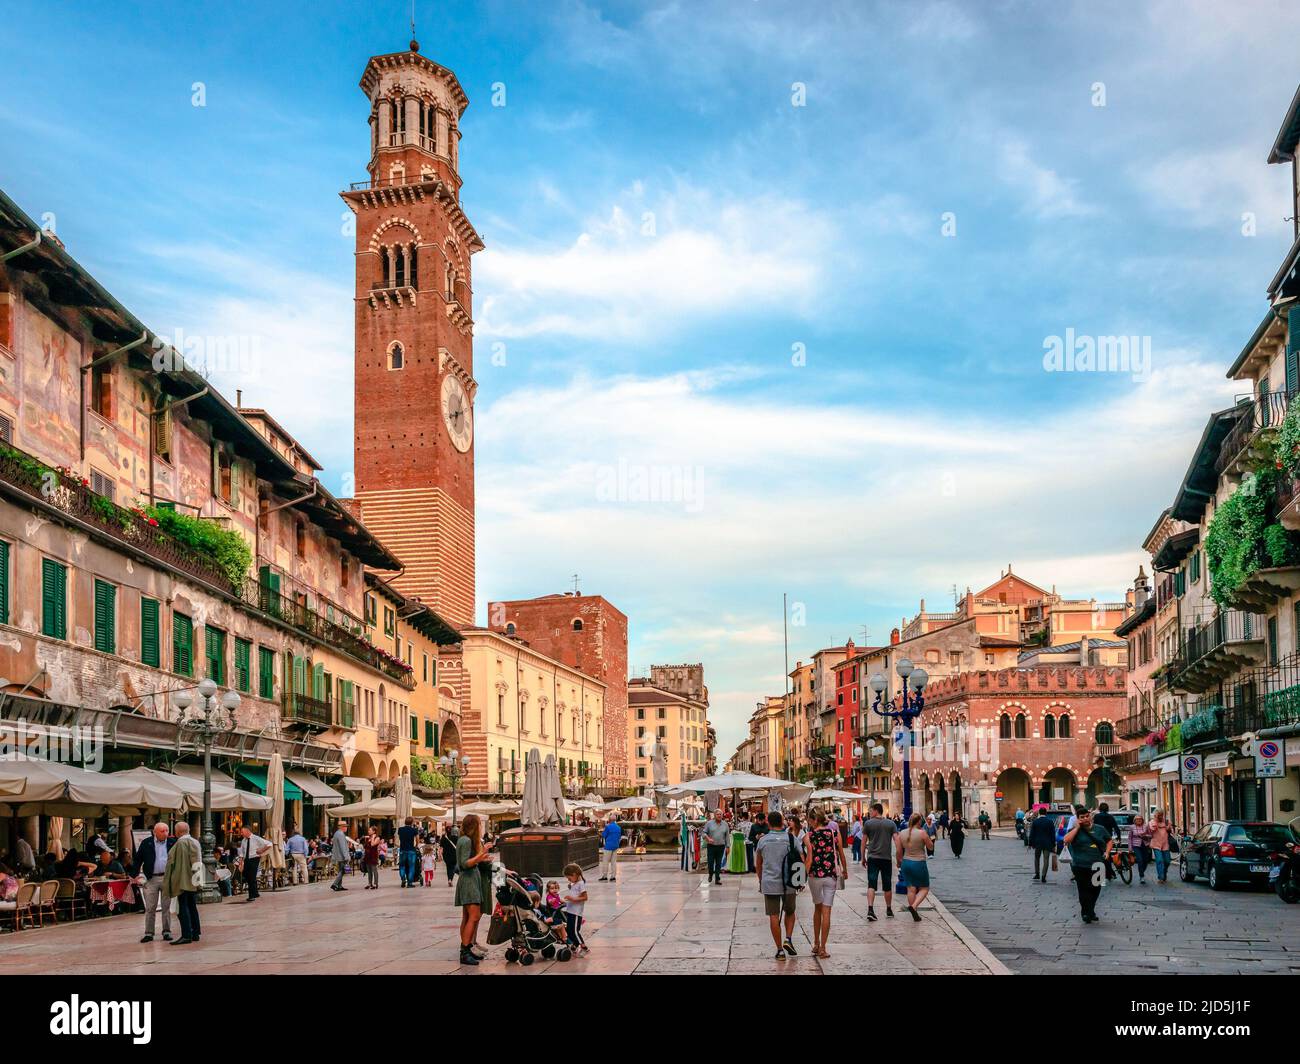 Piazza delle Erbe (Market's square), with Torre dei Lamberti, a medieval 84 m high tower, in the historic old centre of Verona, Italy. Stock Photo